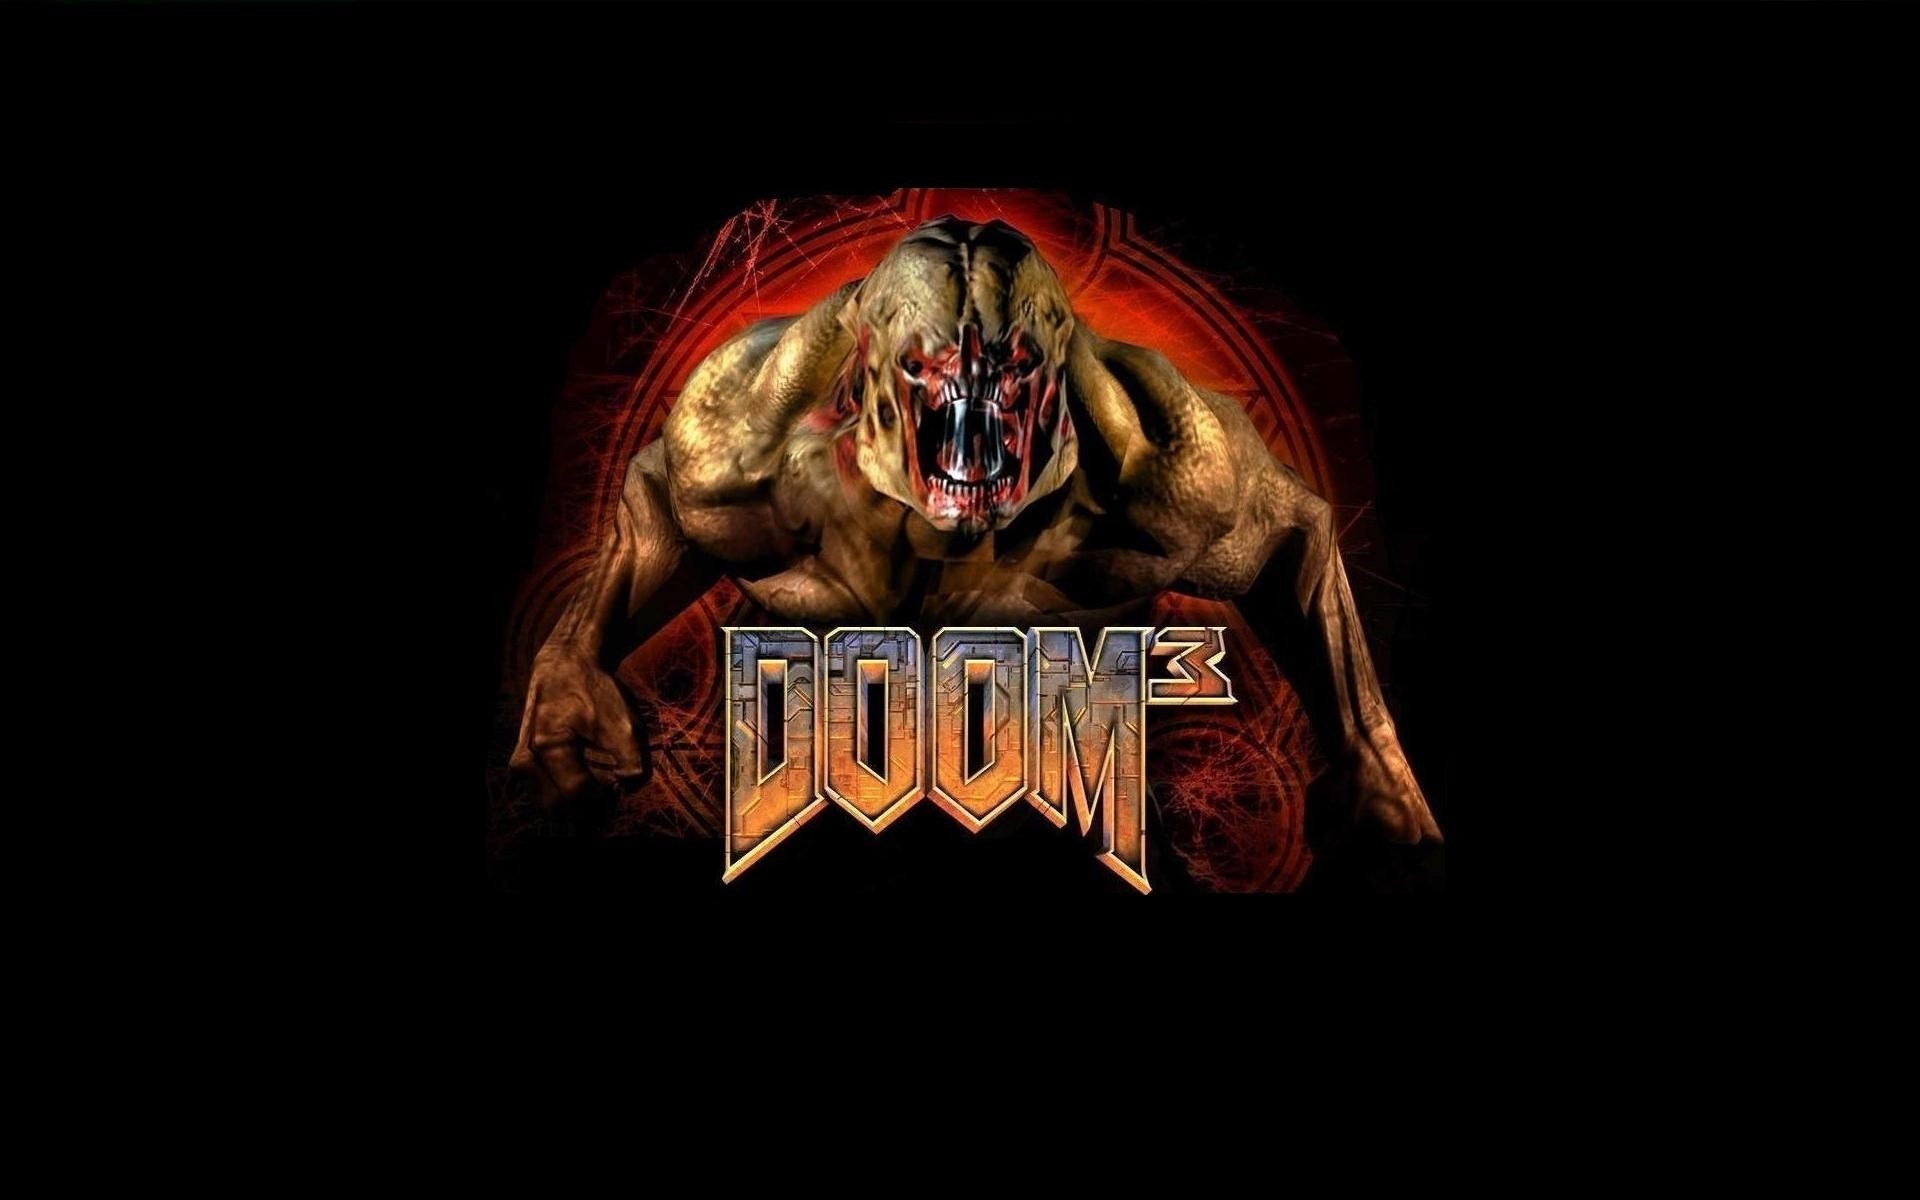 doom wallpaper hd,pc game,darkness,action adventure game,fictional character,font